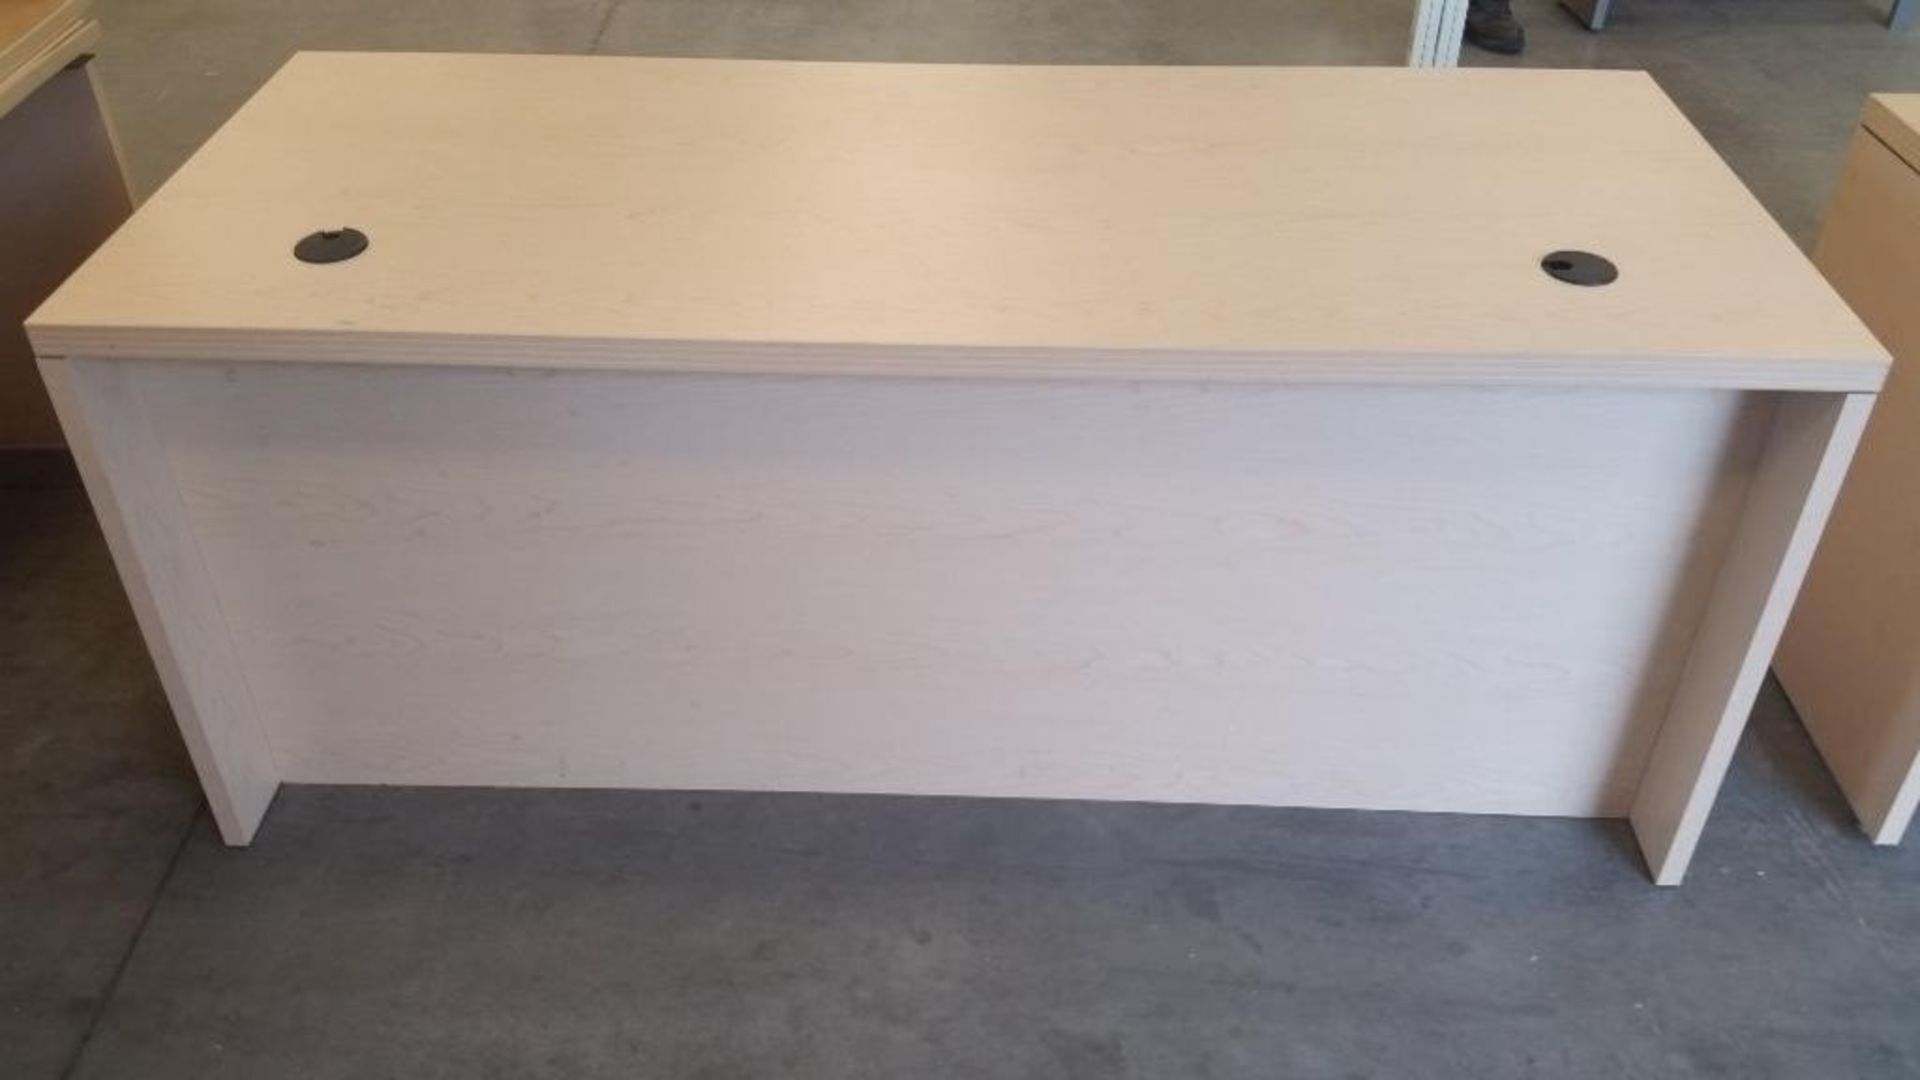 Lot of (3) Allsteel office desks Approx. dimensions 5'W x 3'H x 2'D - Image 4 of 4